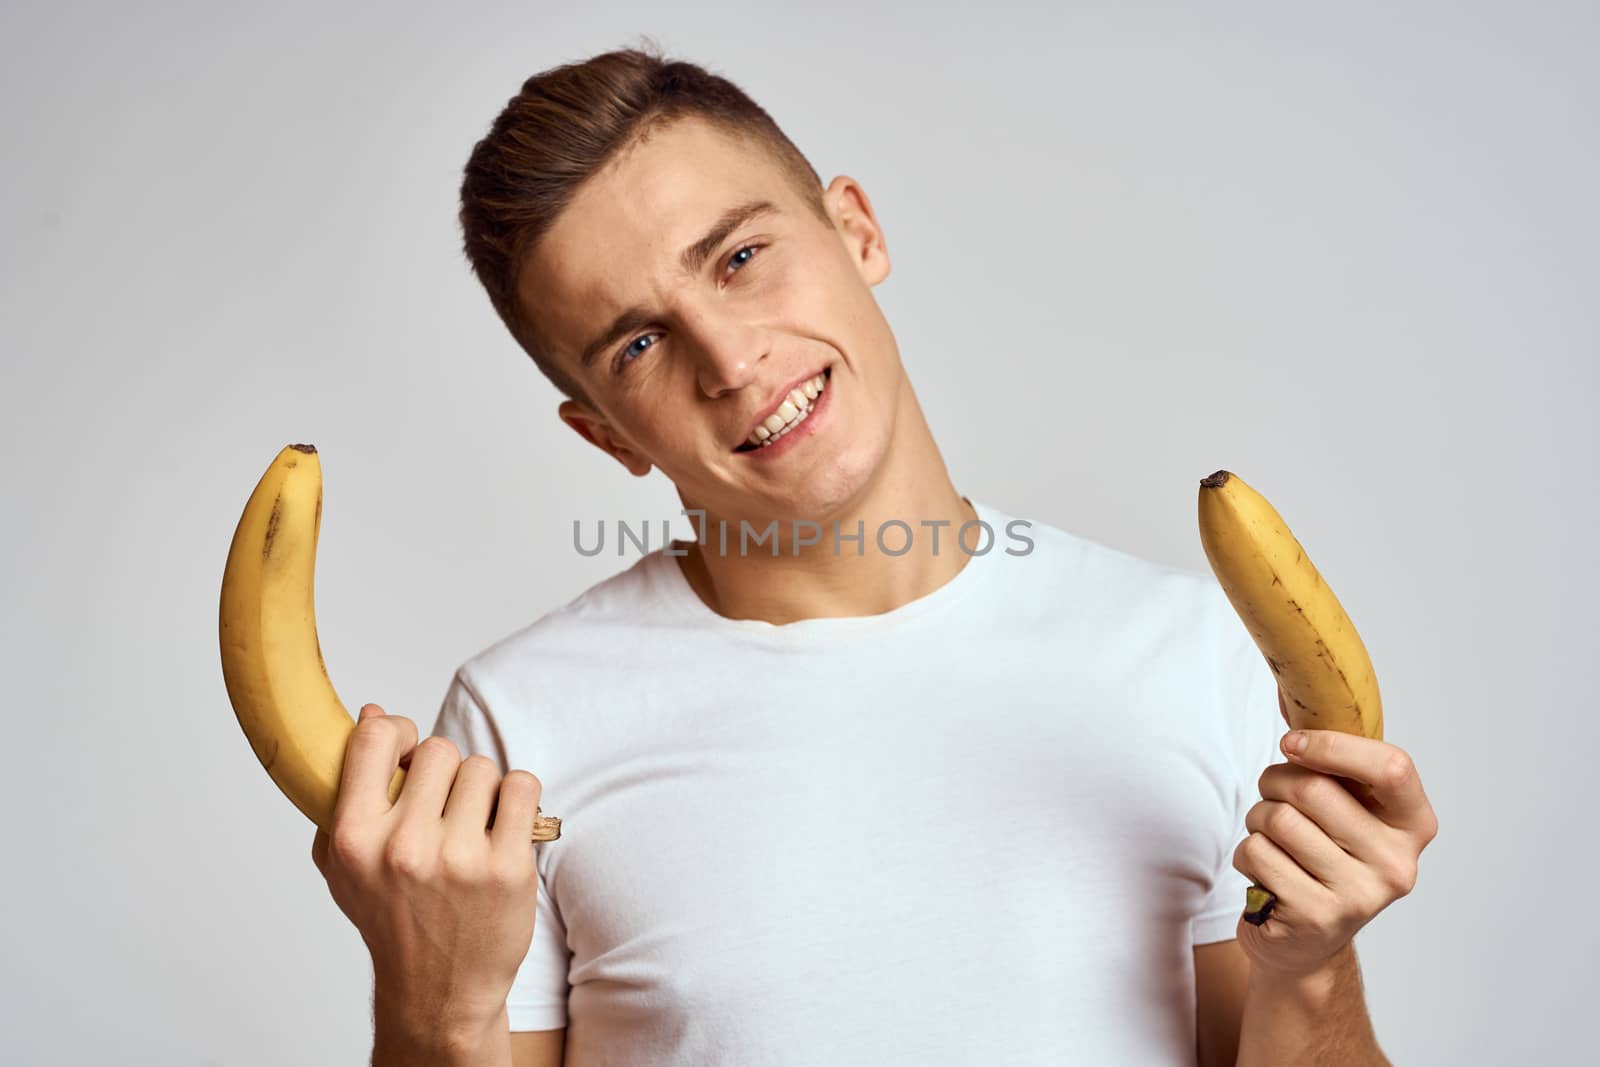 guy with a banana in his hand on a light background fun emotions light background white t-shirt model by SHOTPRIME